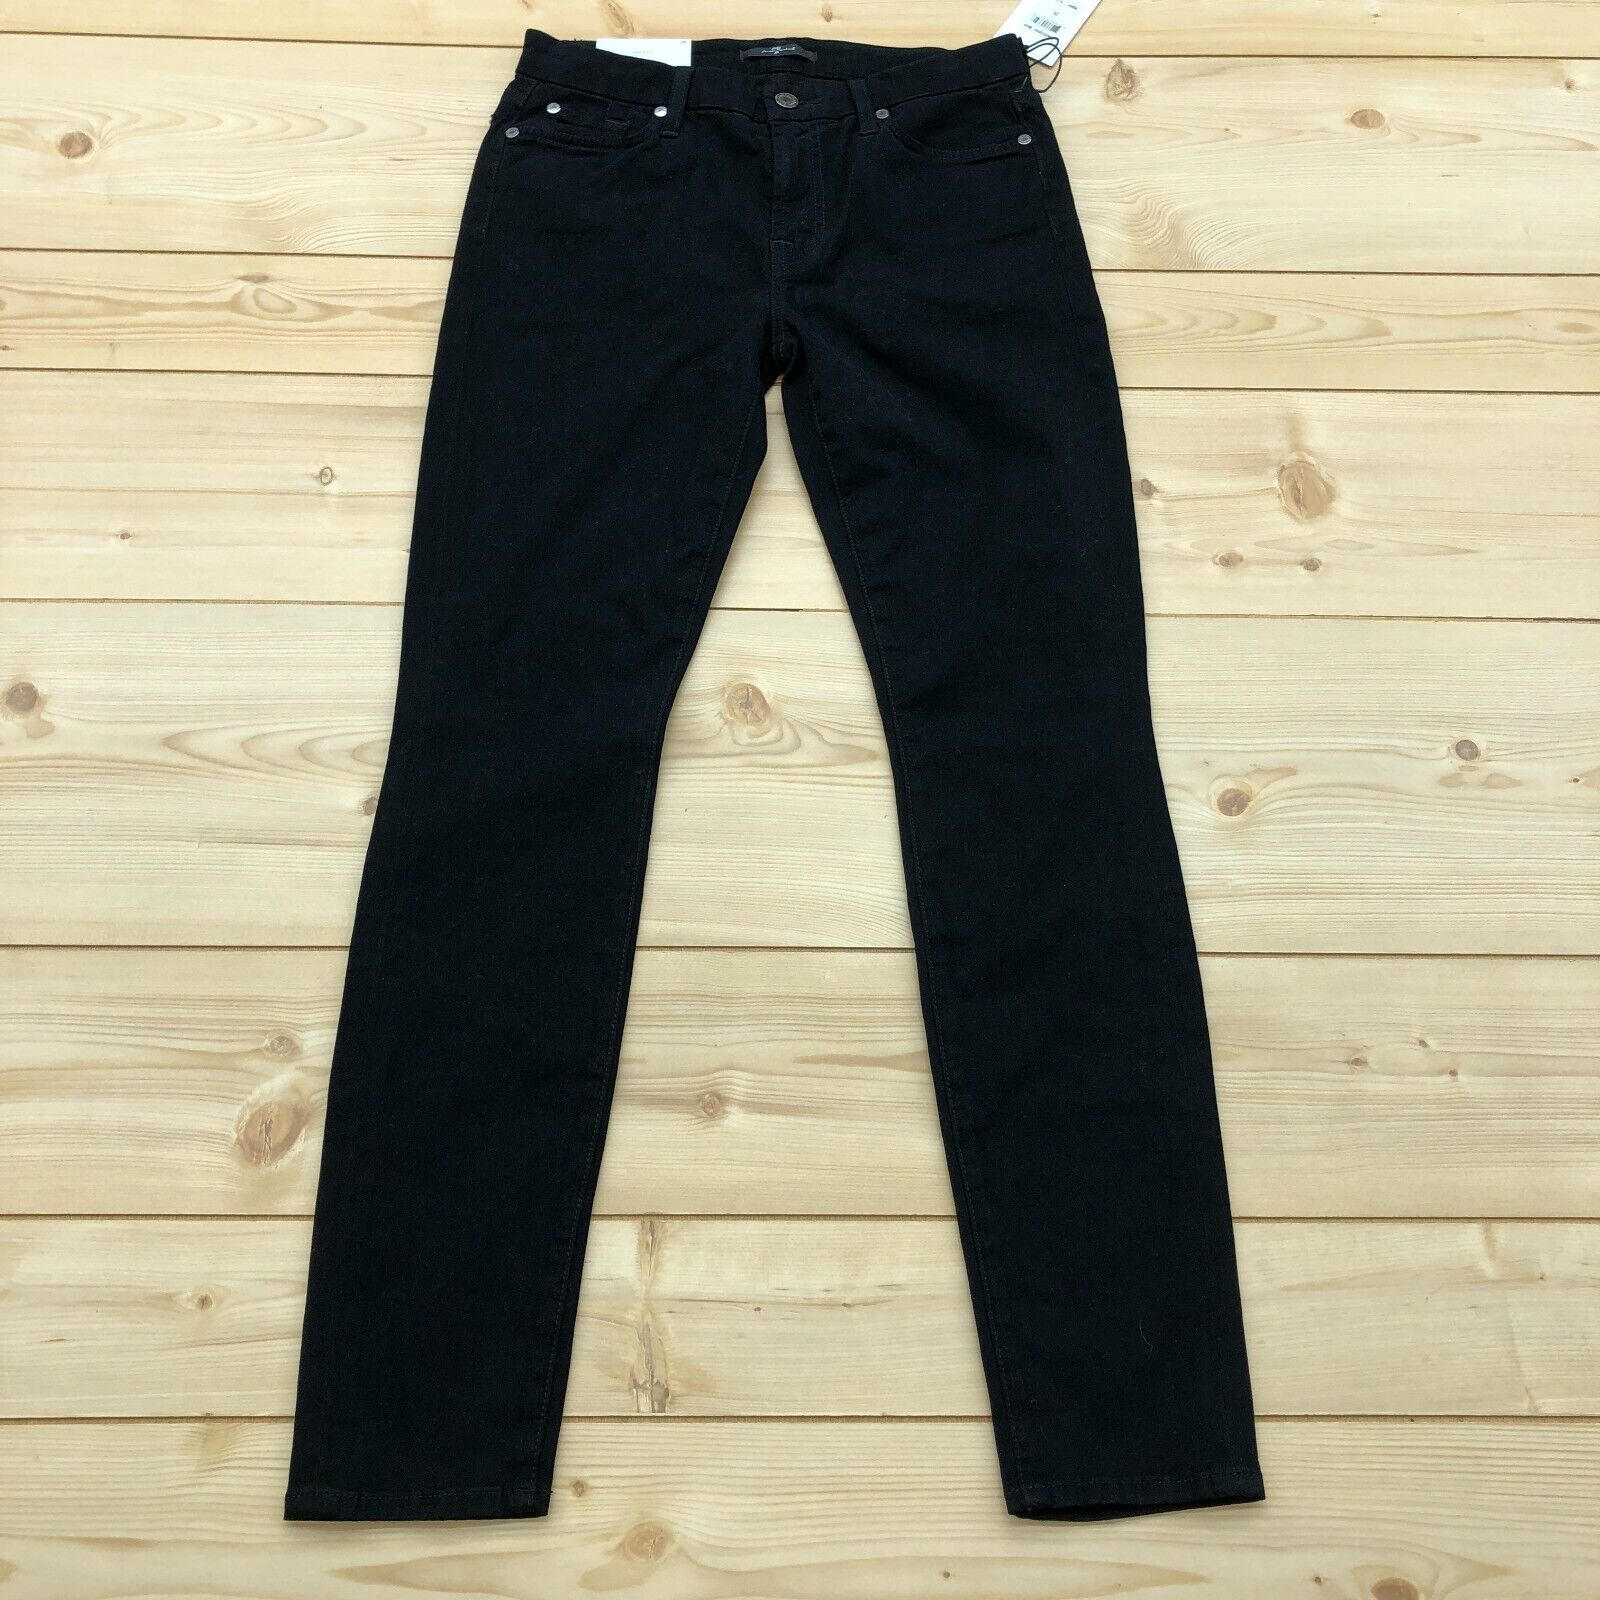 NEW 7 For All Mankind Black Denim Flat Front Tapered Chino Jeans Women's Size 6